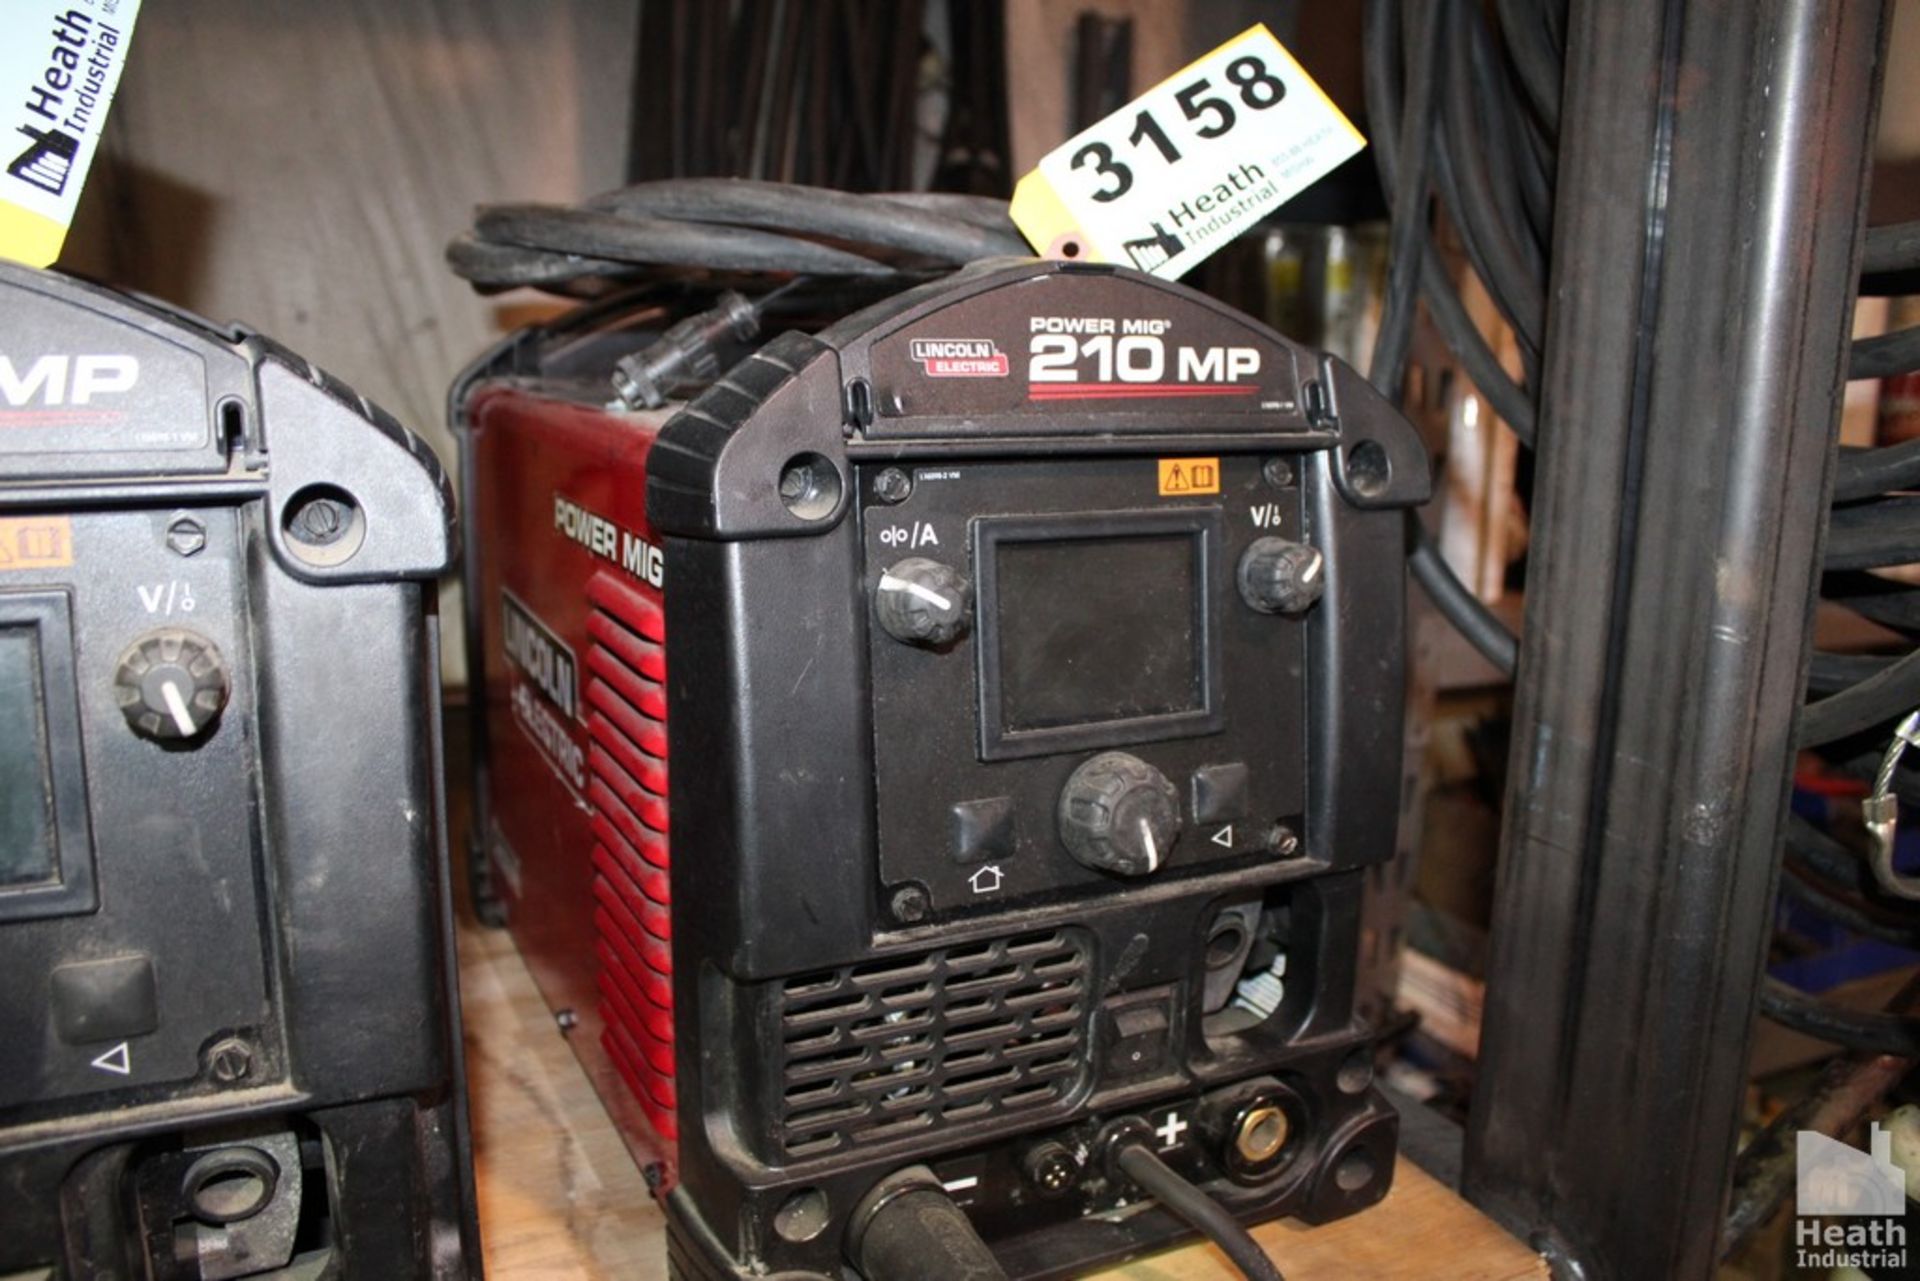 LINCOLN ELECTRIC POWER MIG 210 MP WIRE FEED WELDER